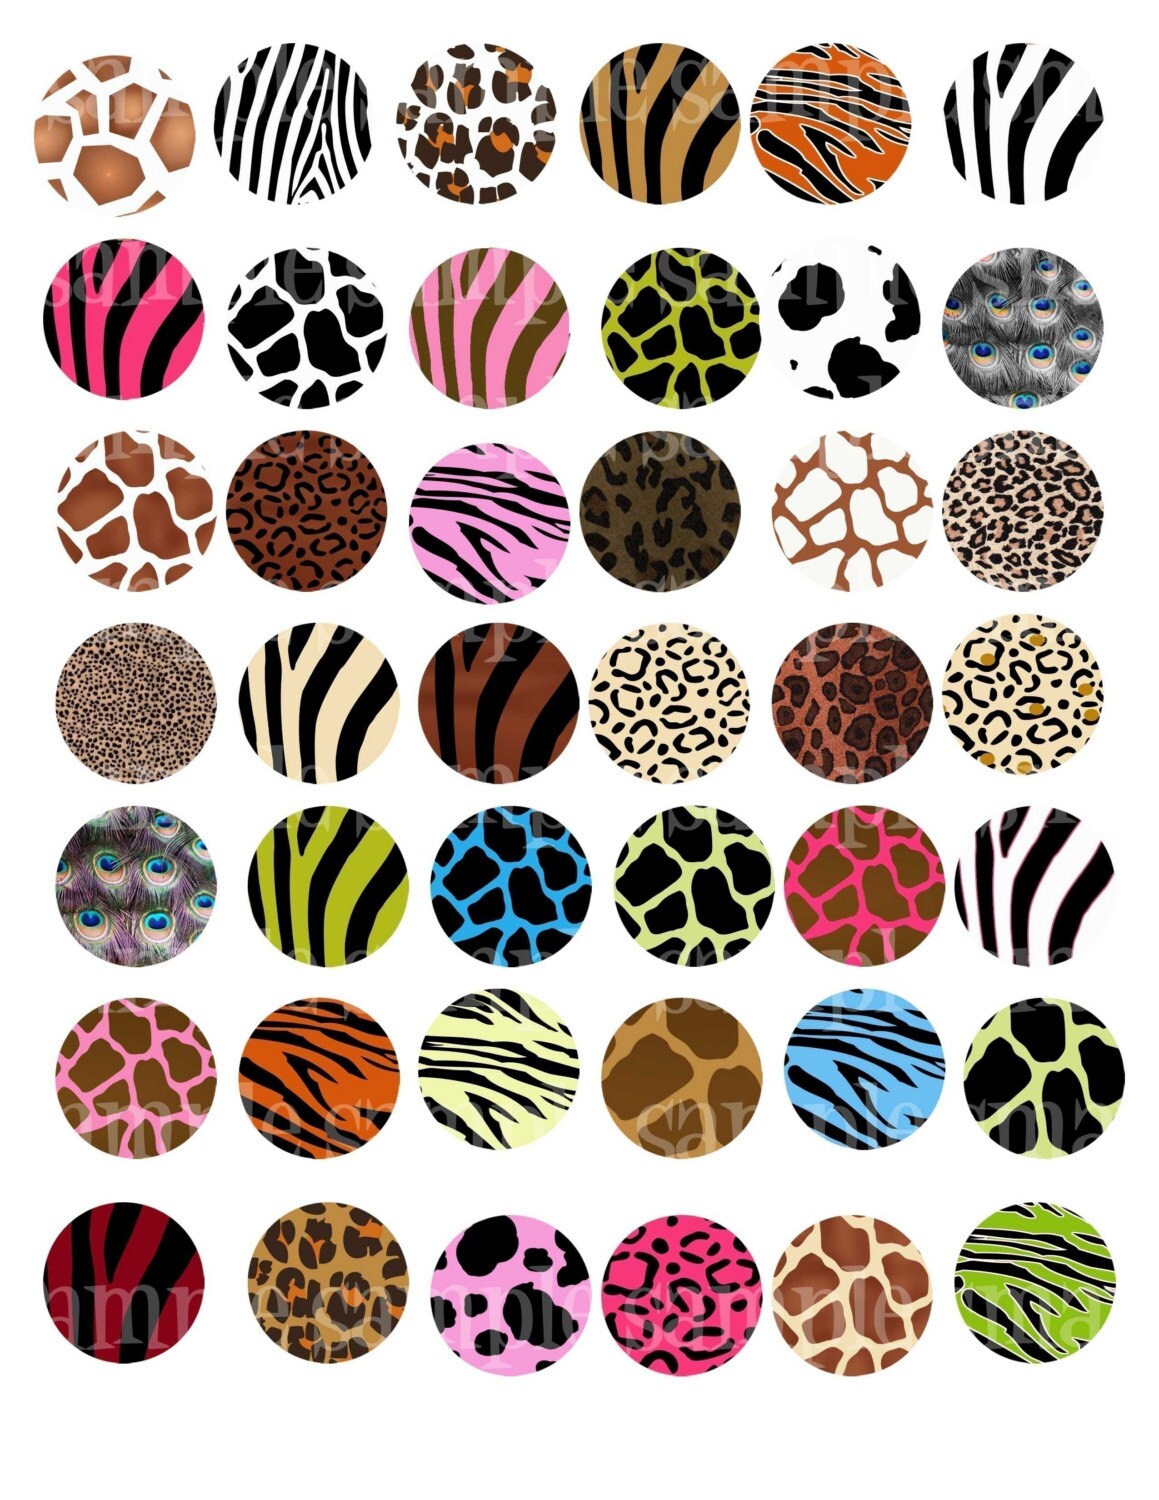 New Animal Prints Digital Collage Sheet 1 inch by cupcakecutiees